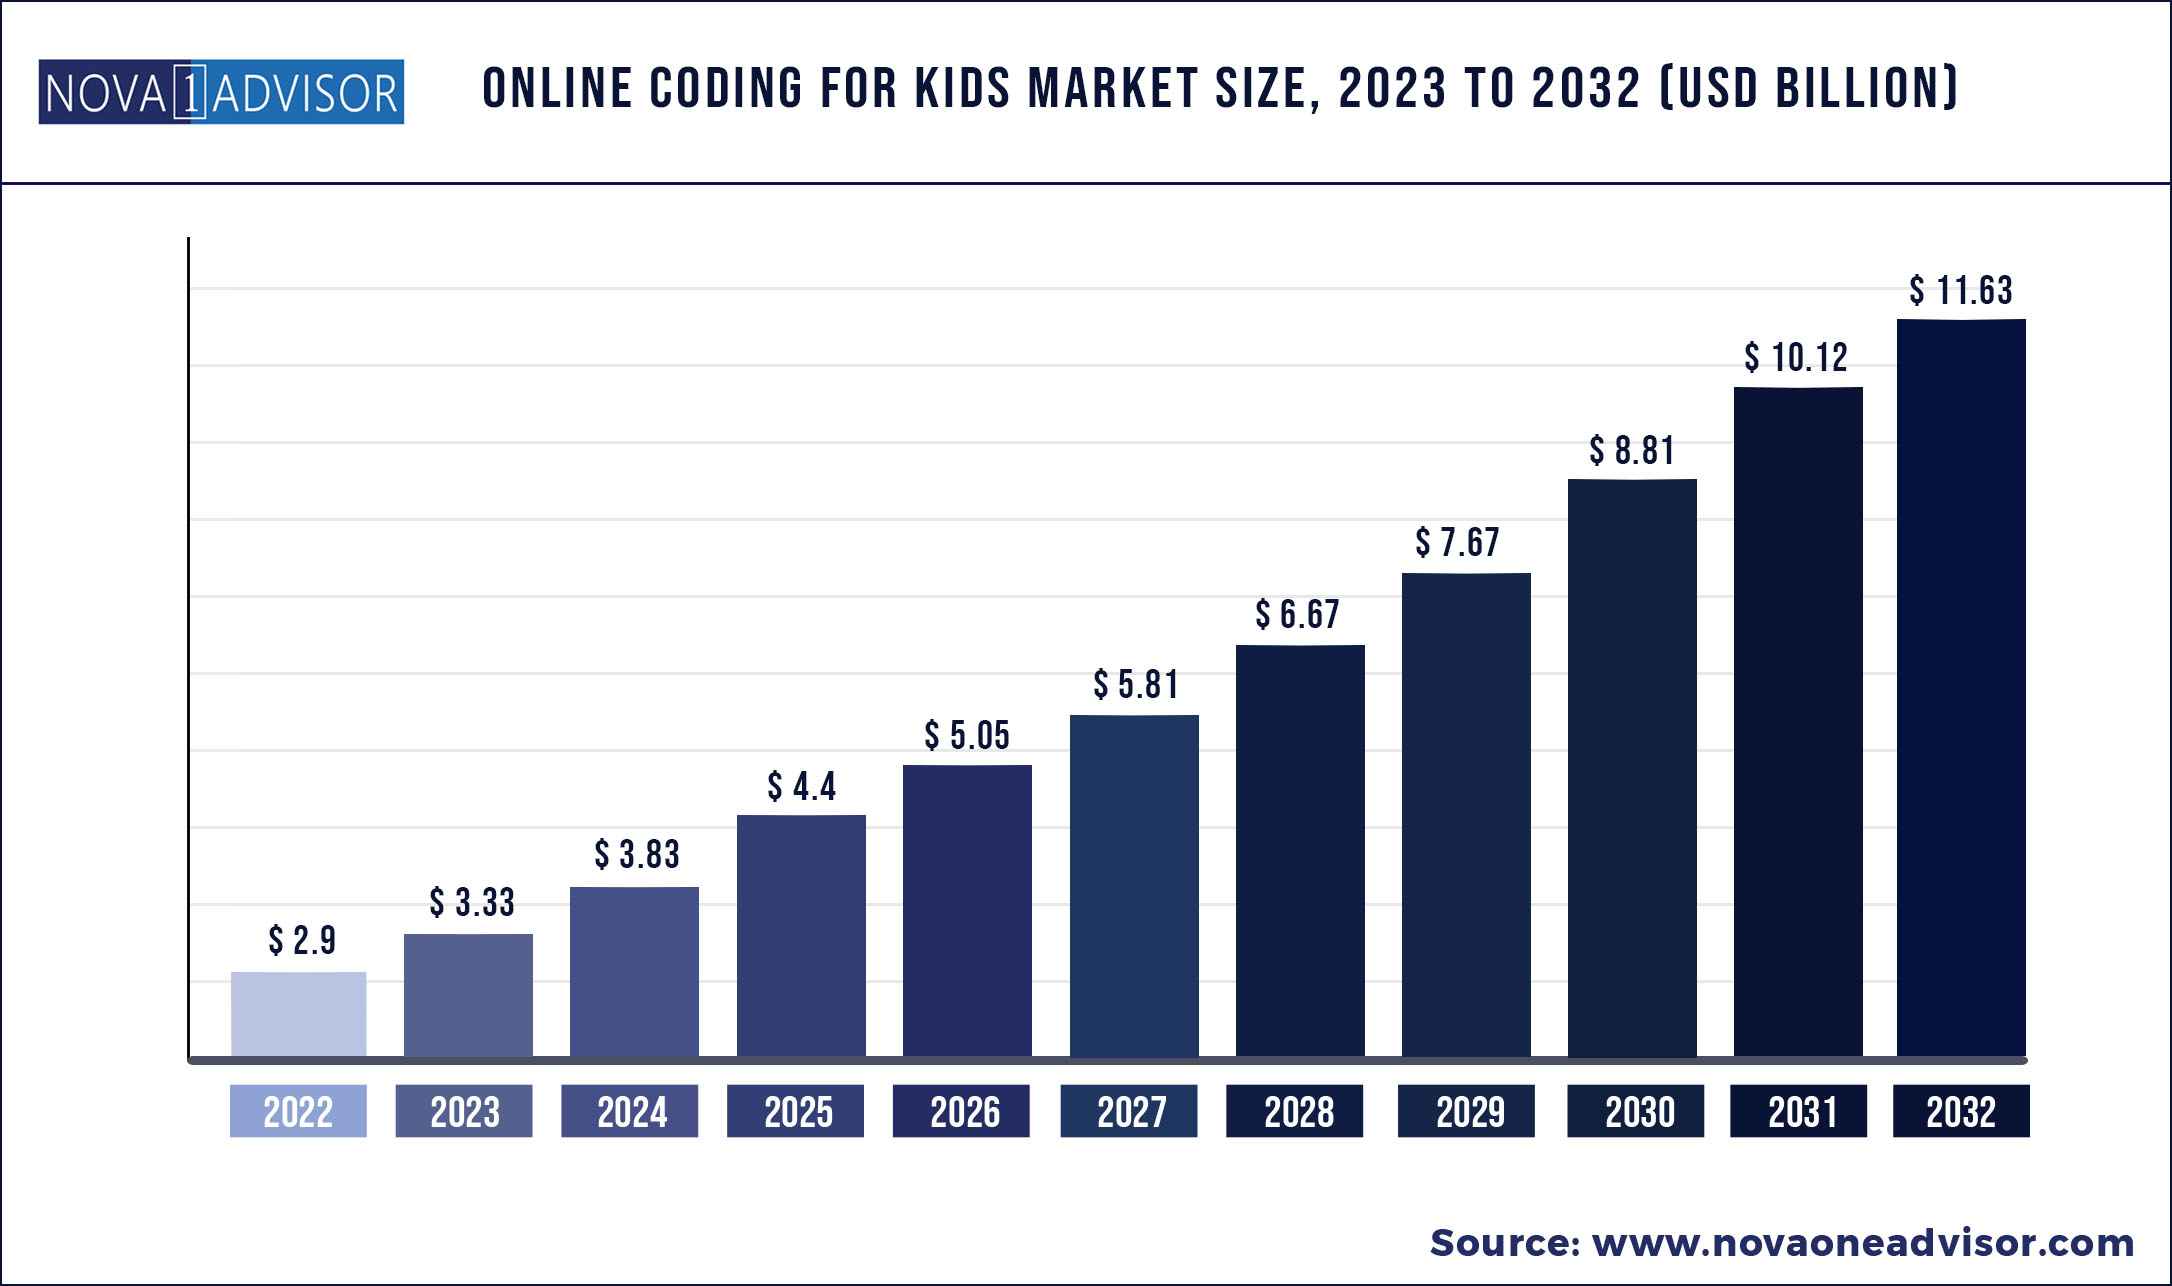 Online Coding for Kids Market Size, Share & Analysis Report, 2023-2032